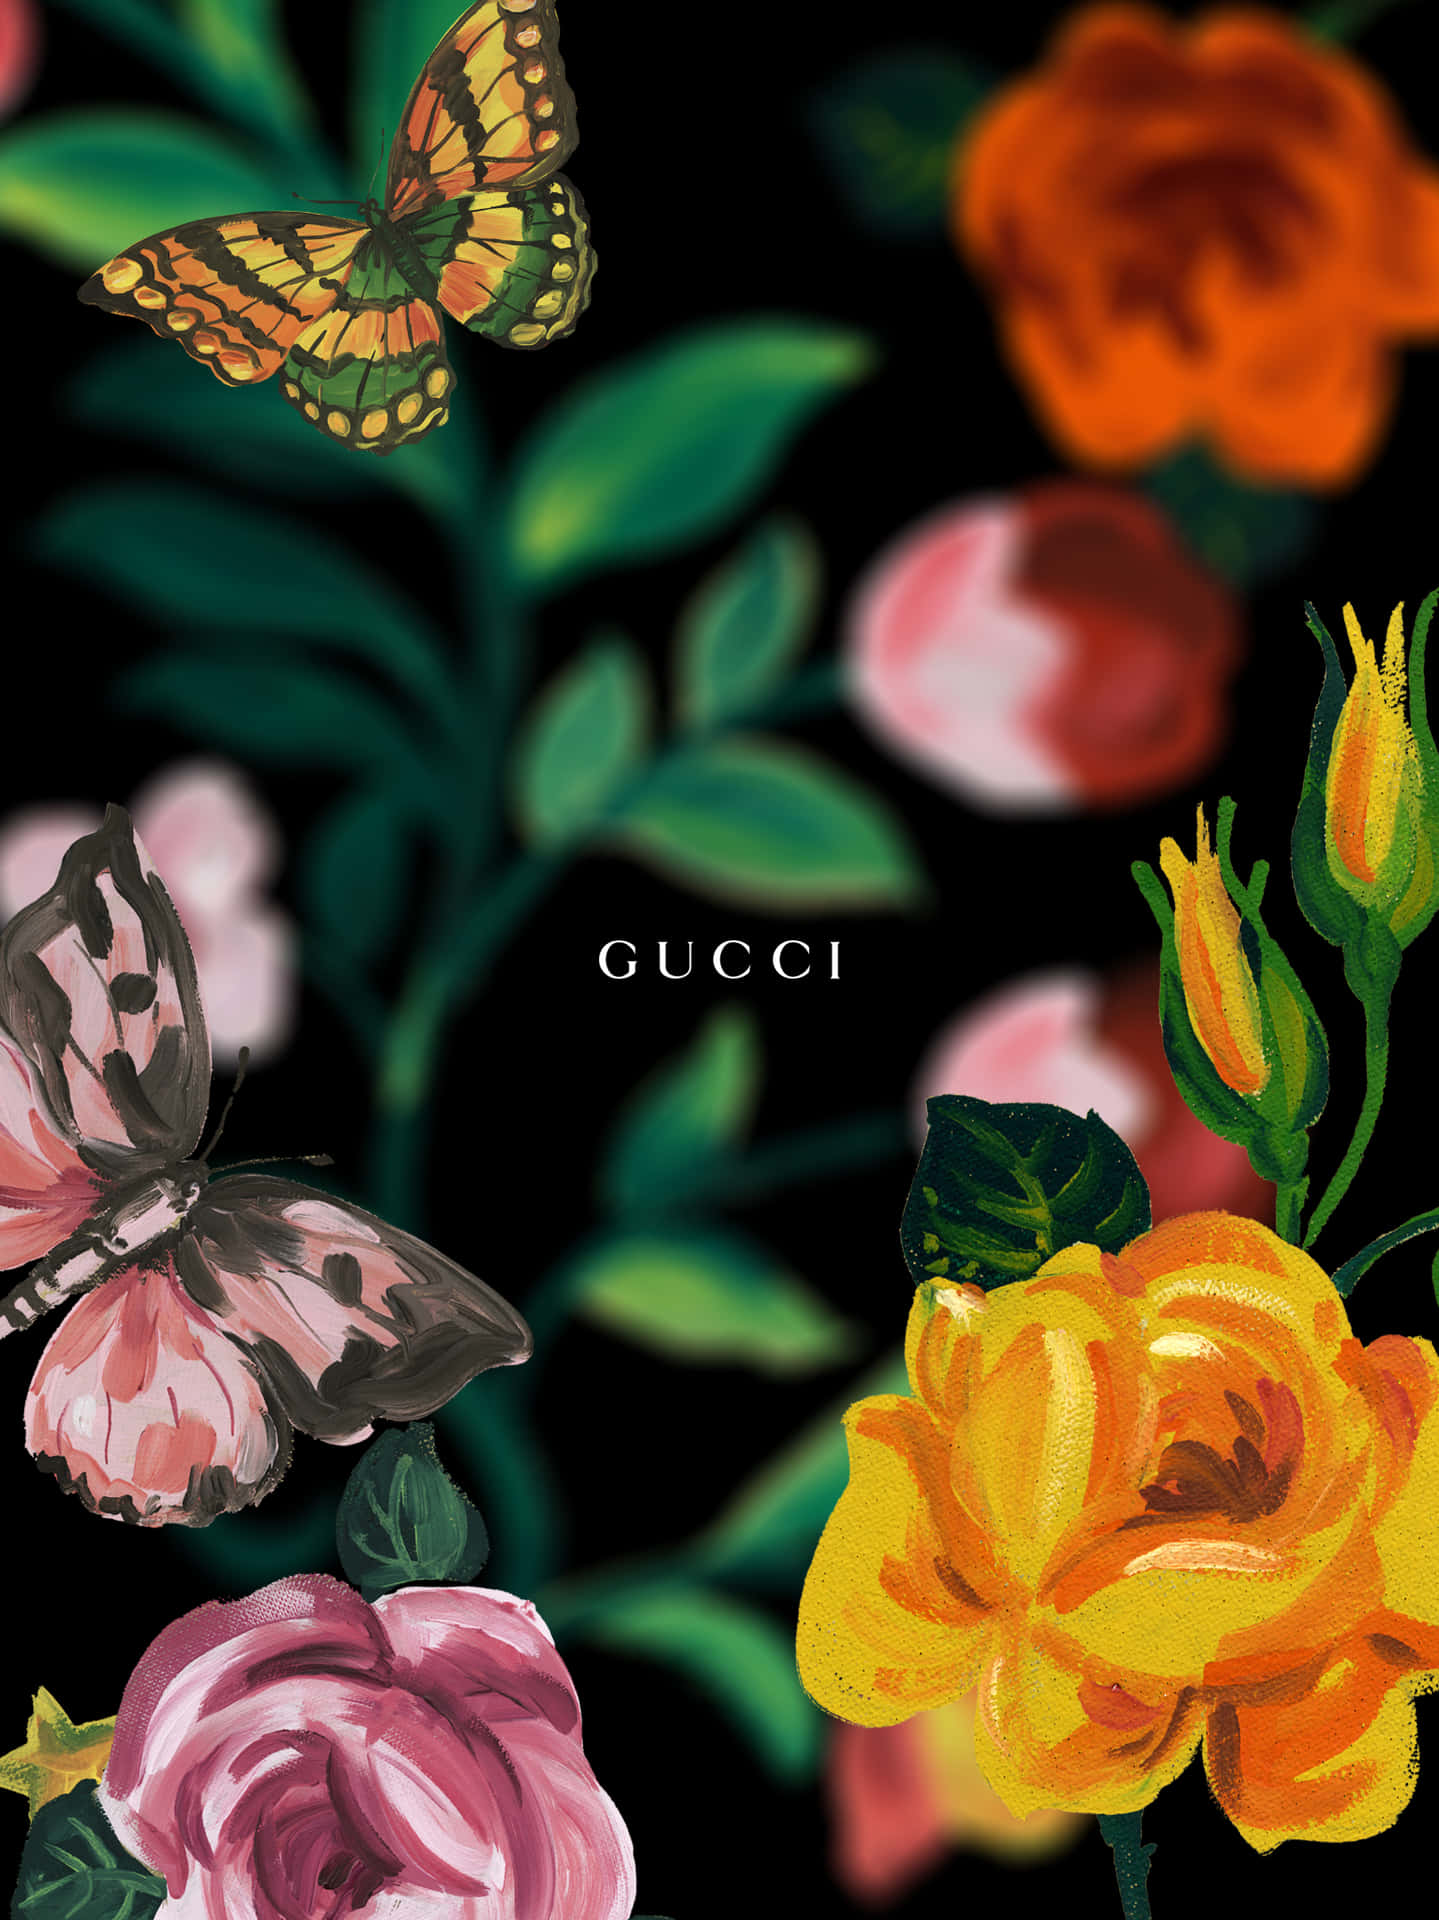 100+] Gucci Green Wallpapers